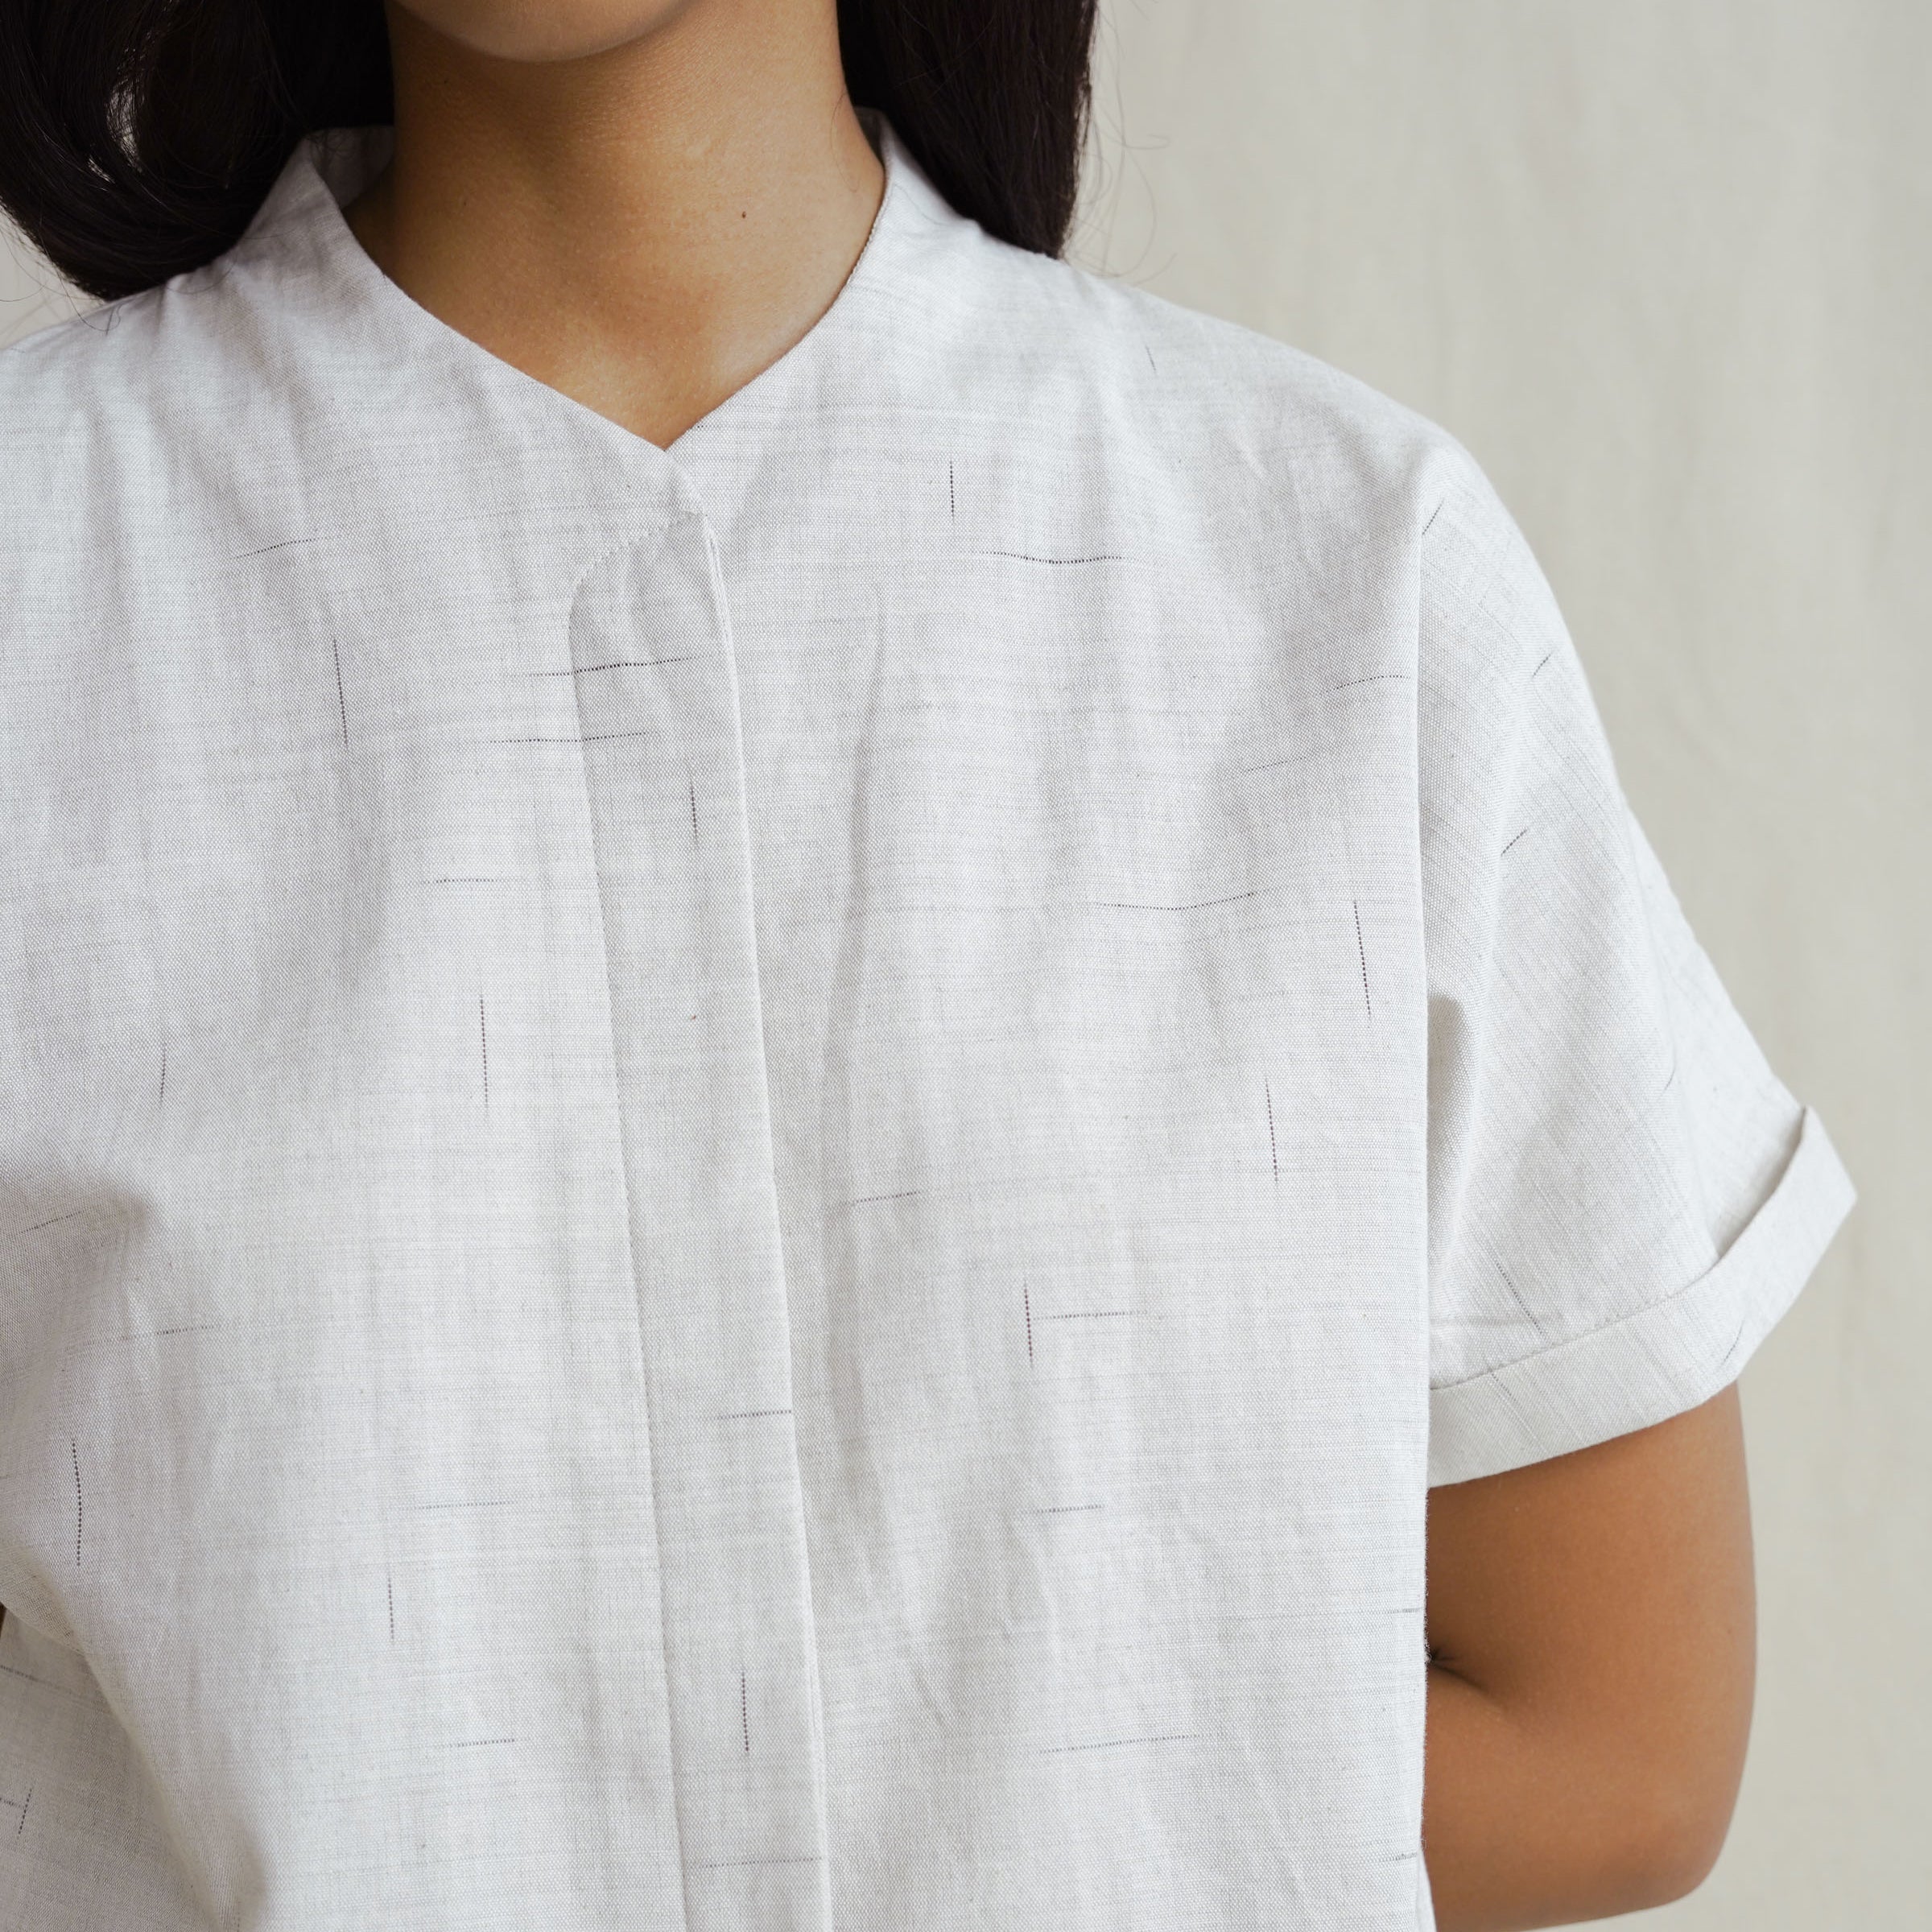 women's top, 100% raw cotton, handmade, handcrafted, slow fashion, sustainable fashion